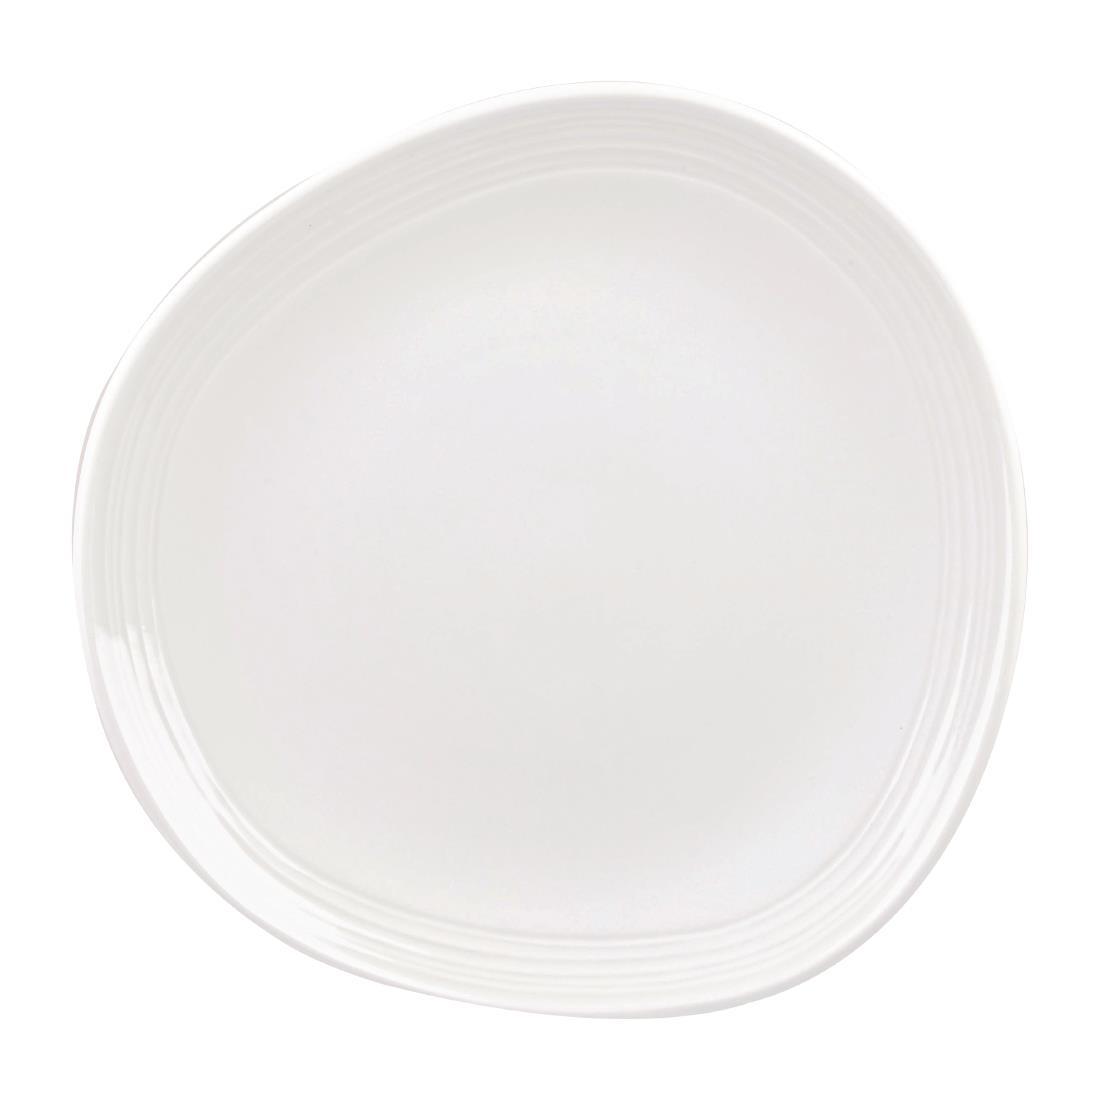 Churchill Discover Round Plates White 186mm (Pack of 12) - CS067  - 2